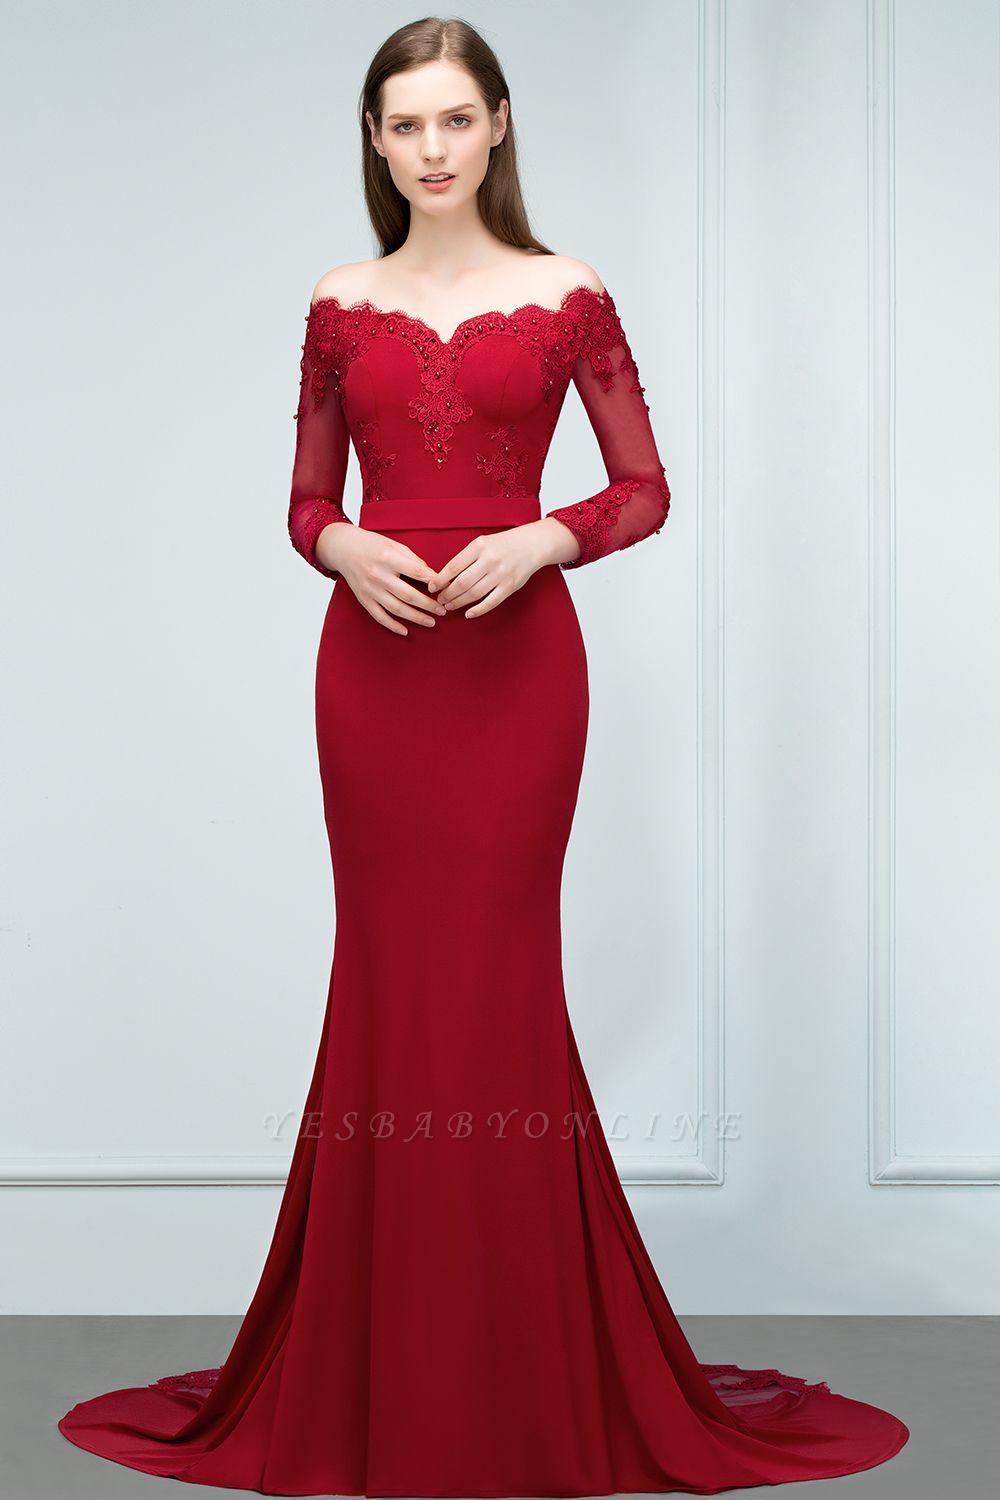 Mermaid Charmeuse Off-the-Shoulder V-Neck Long-Sleeves Floor-Length Bridesmaid Dress with Appliques